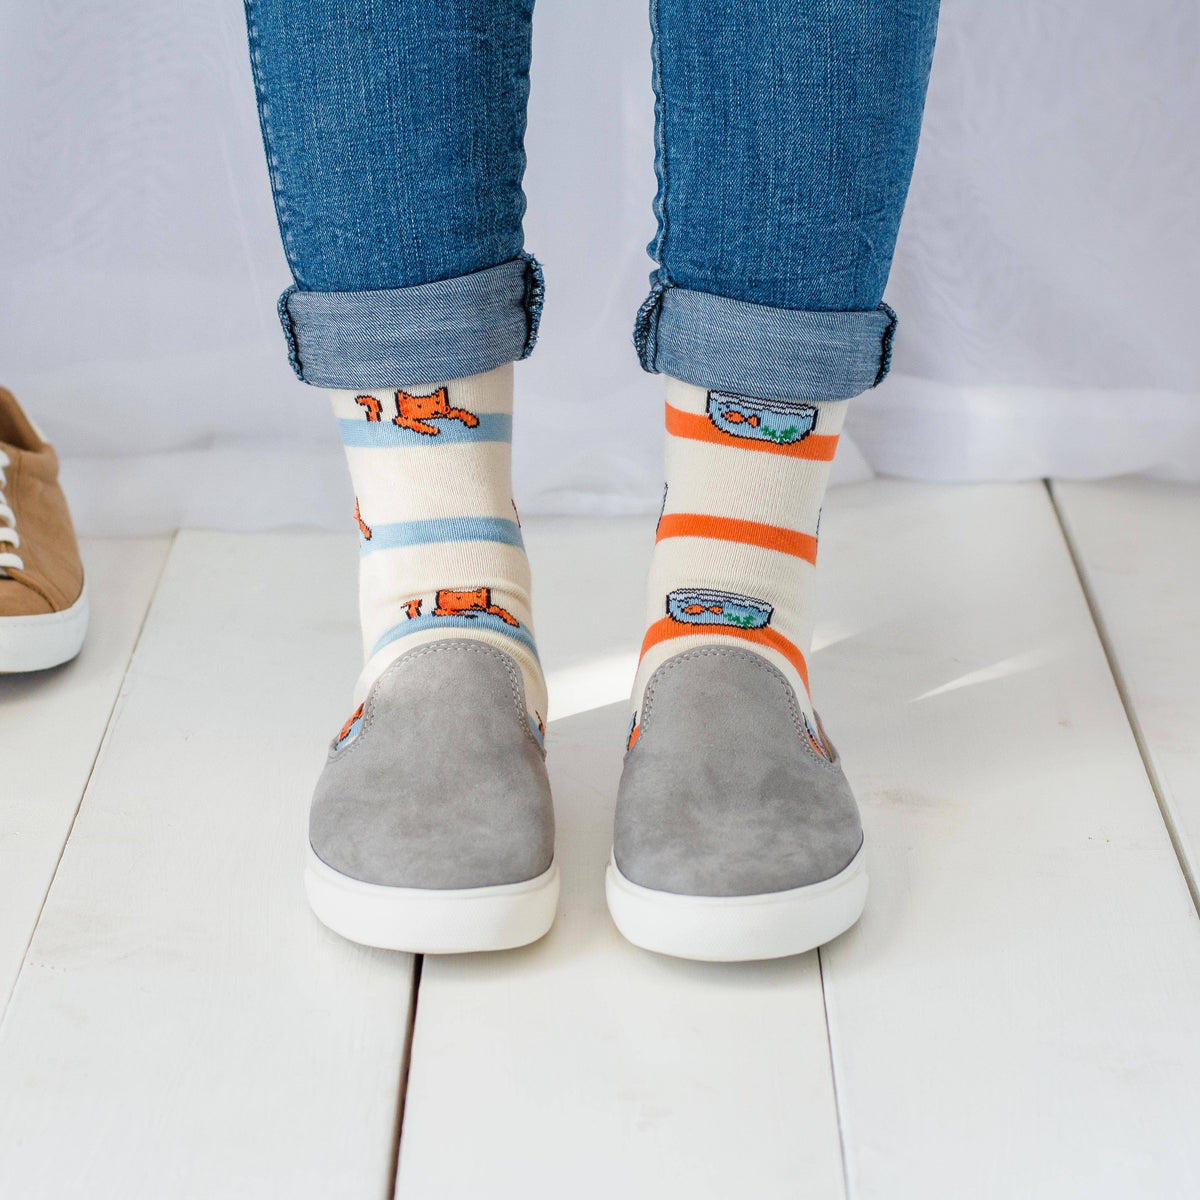 Friday Sock CO - Women’s Socks | Cat and Fishbowl | Ethically Made